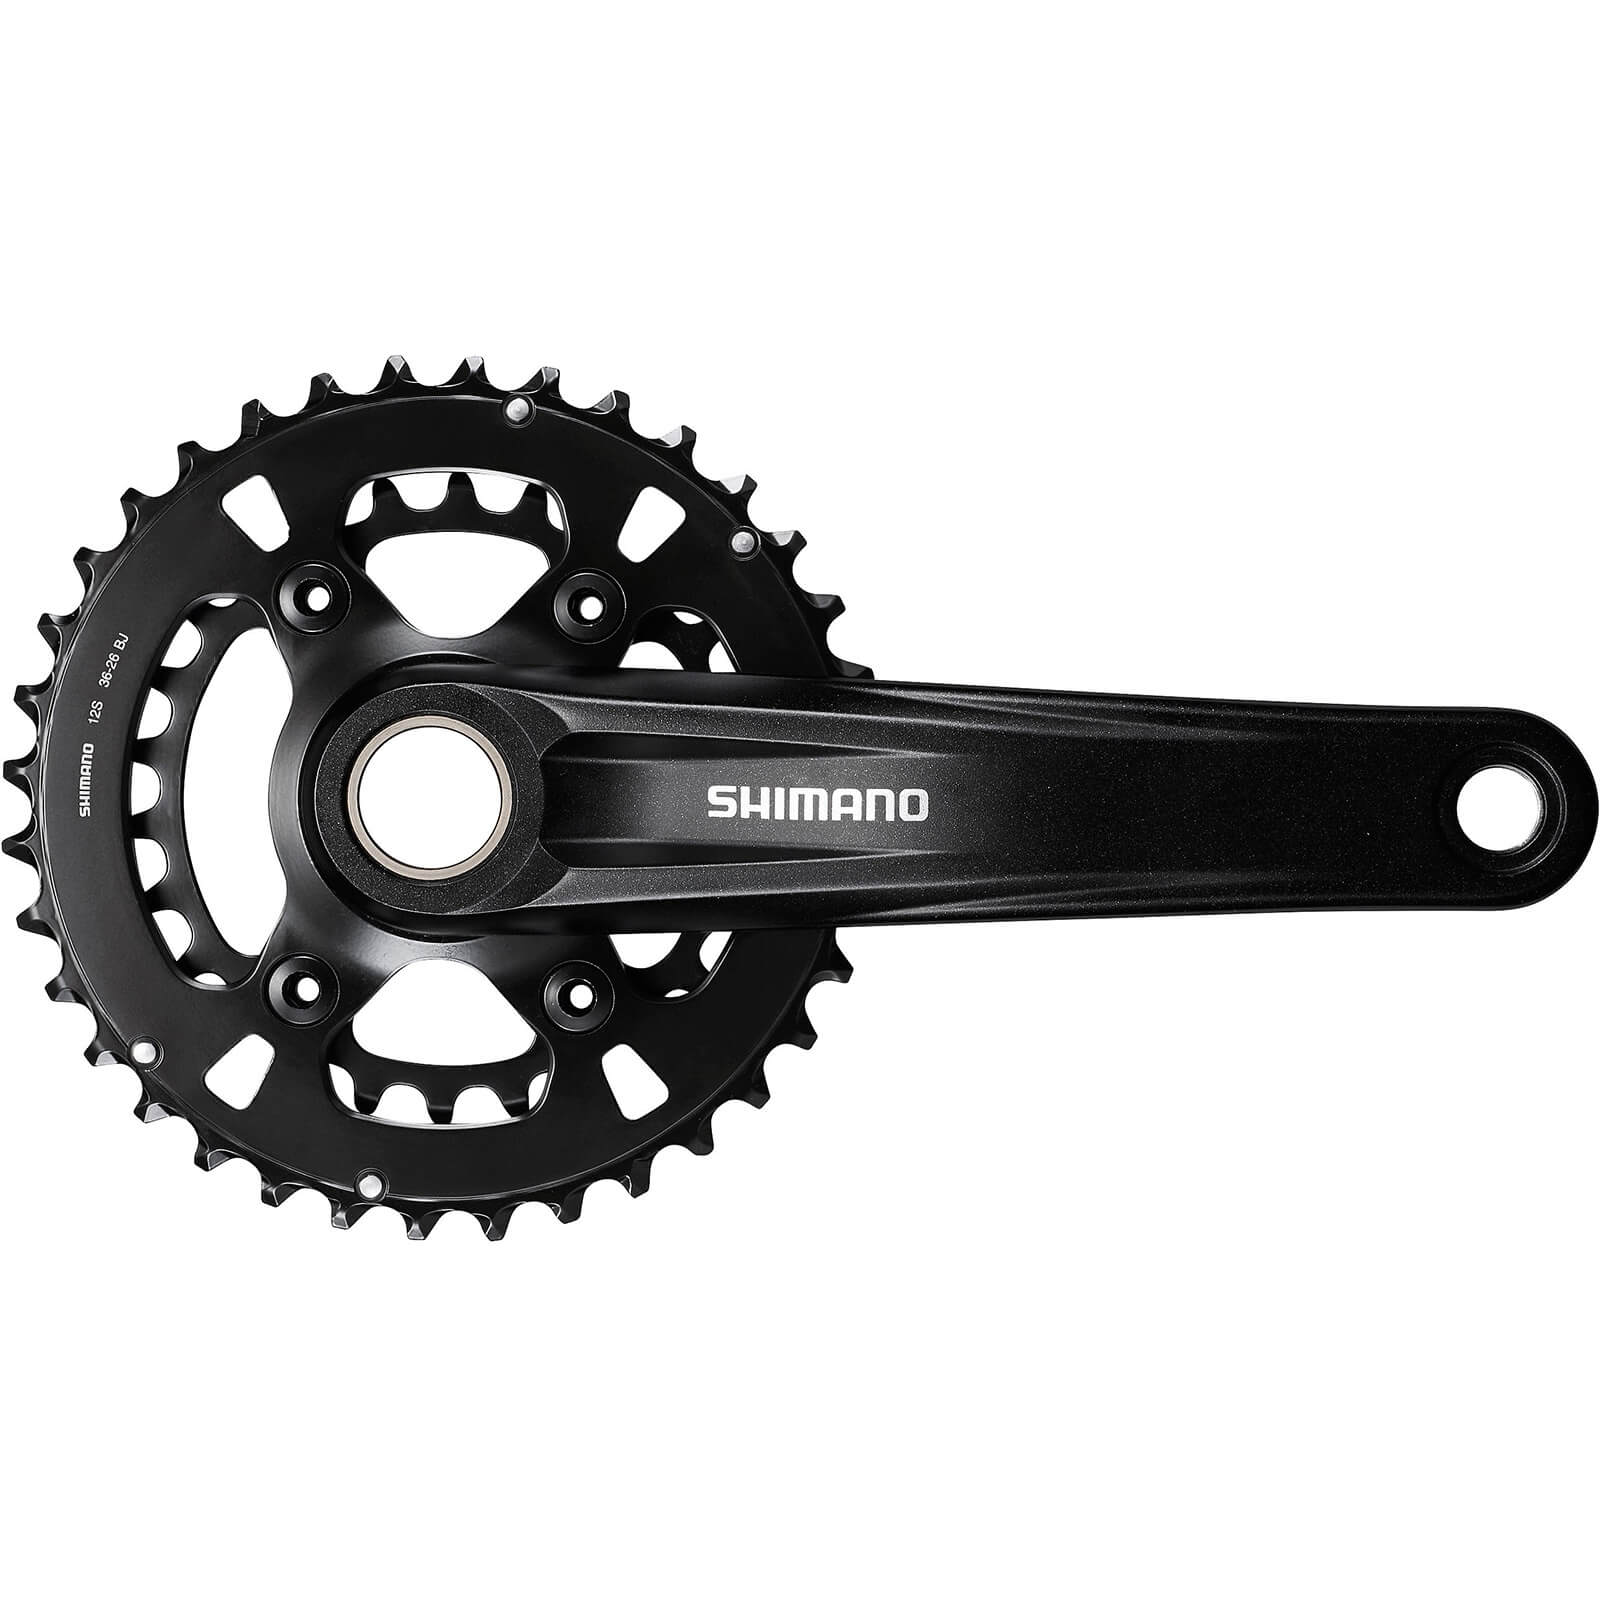 Image of Shimano Deore FC-M6100 2-piece design 48.8 mm chainline 12-speed chainset